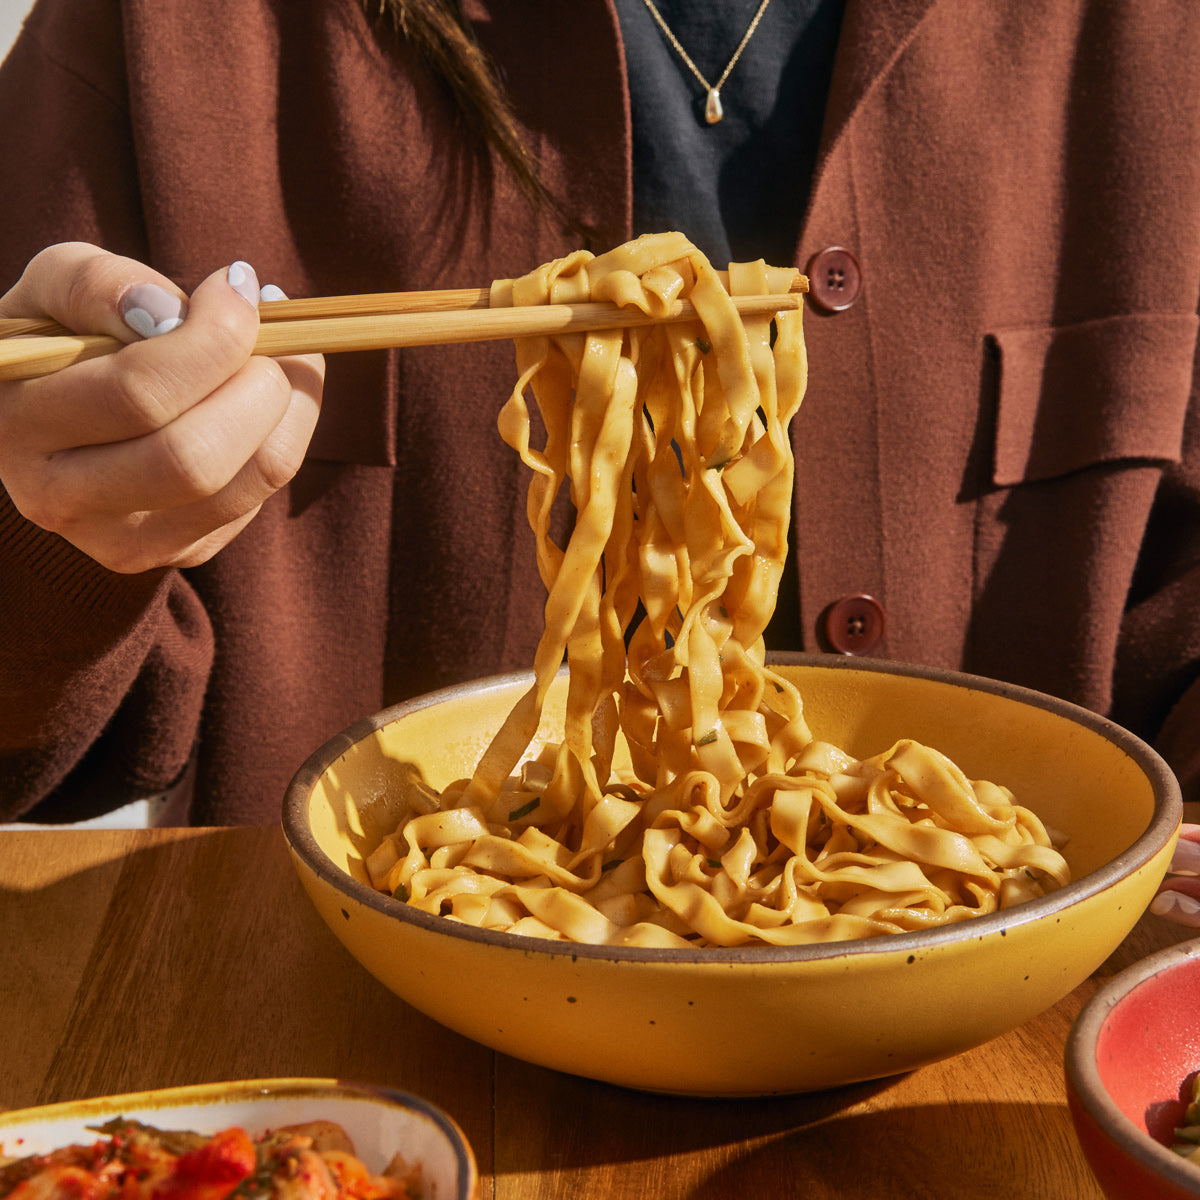 Noodles being pulled with chopsticks